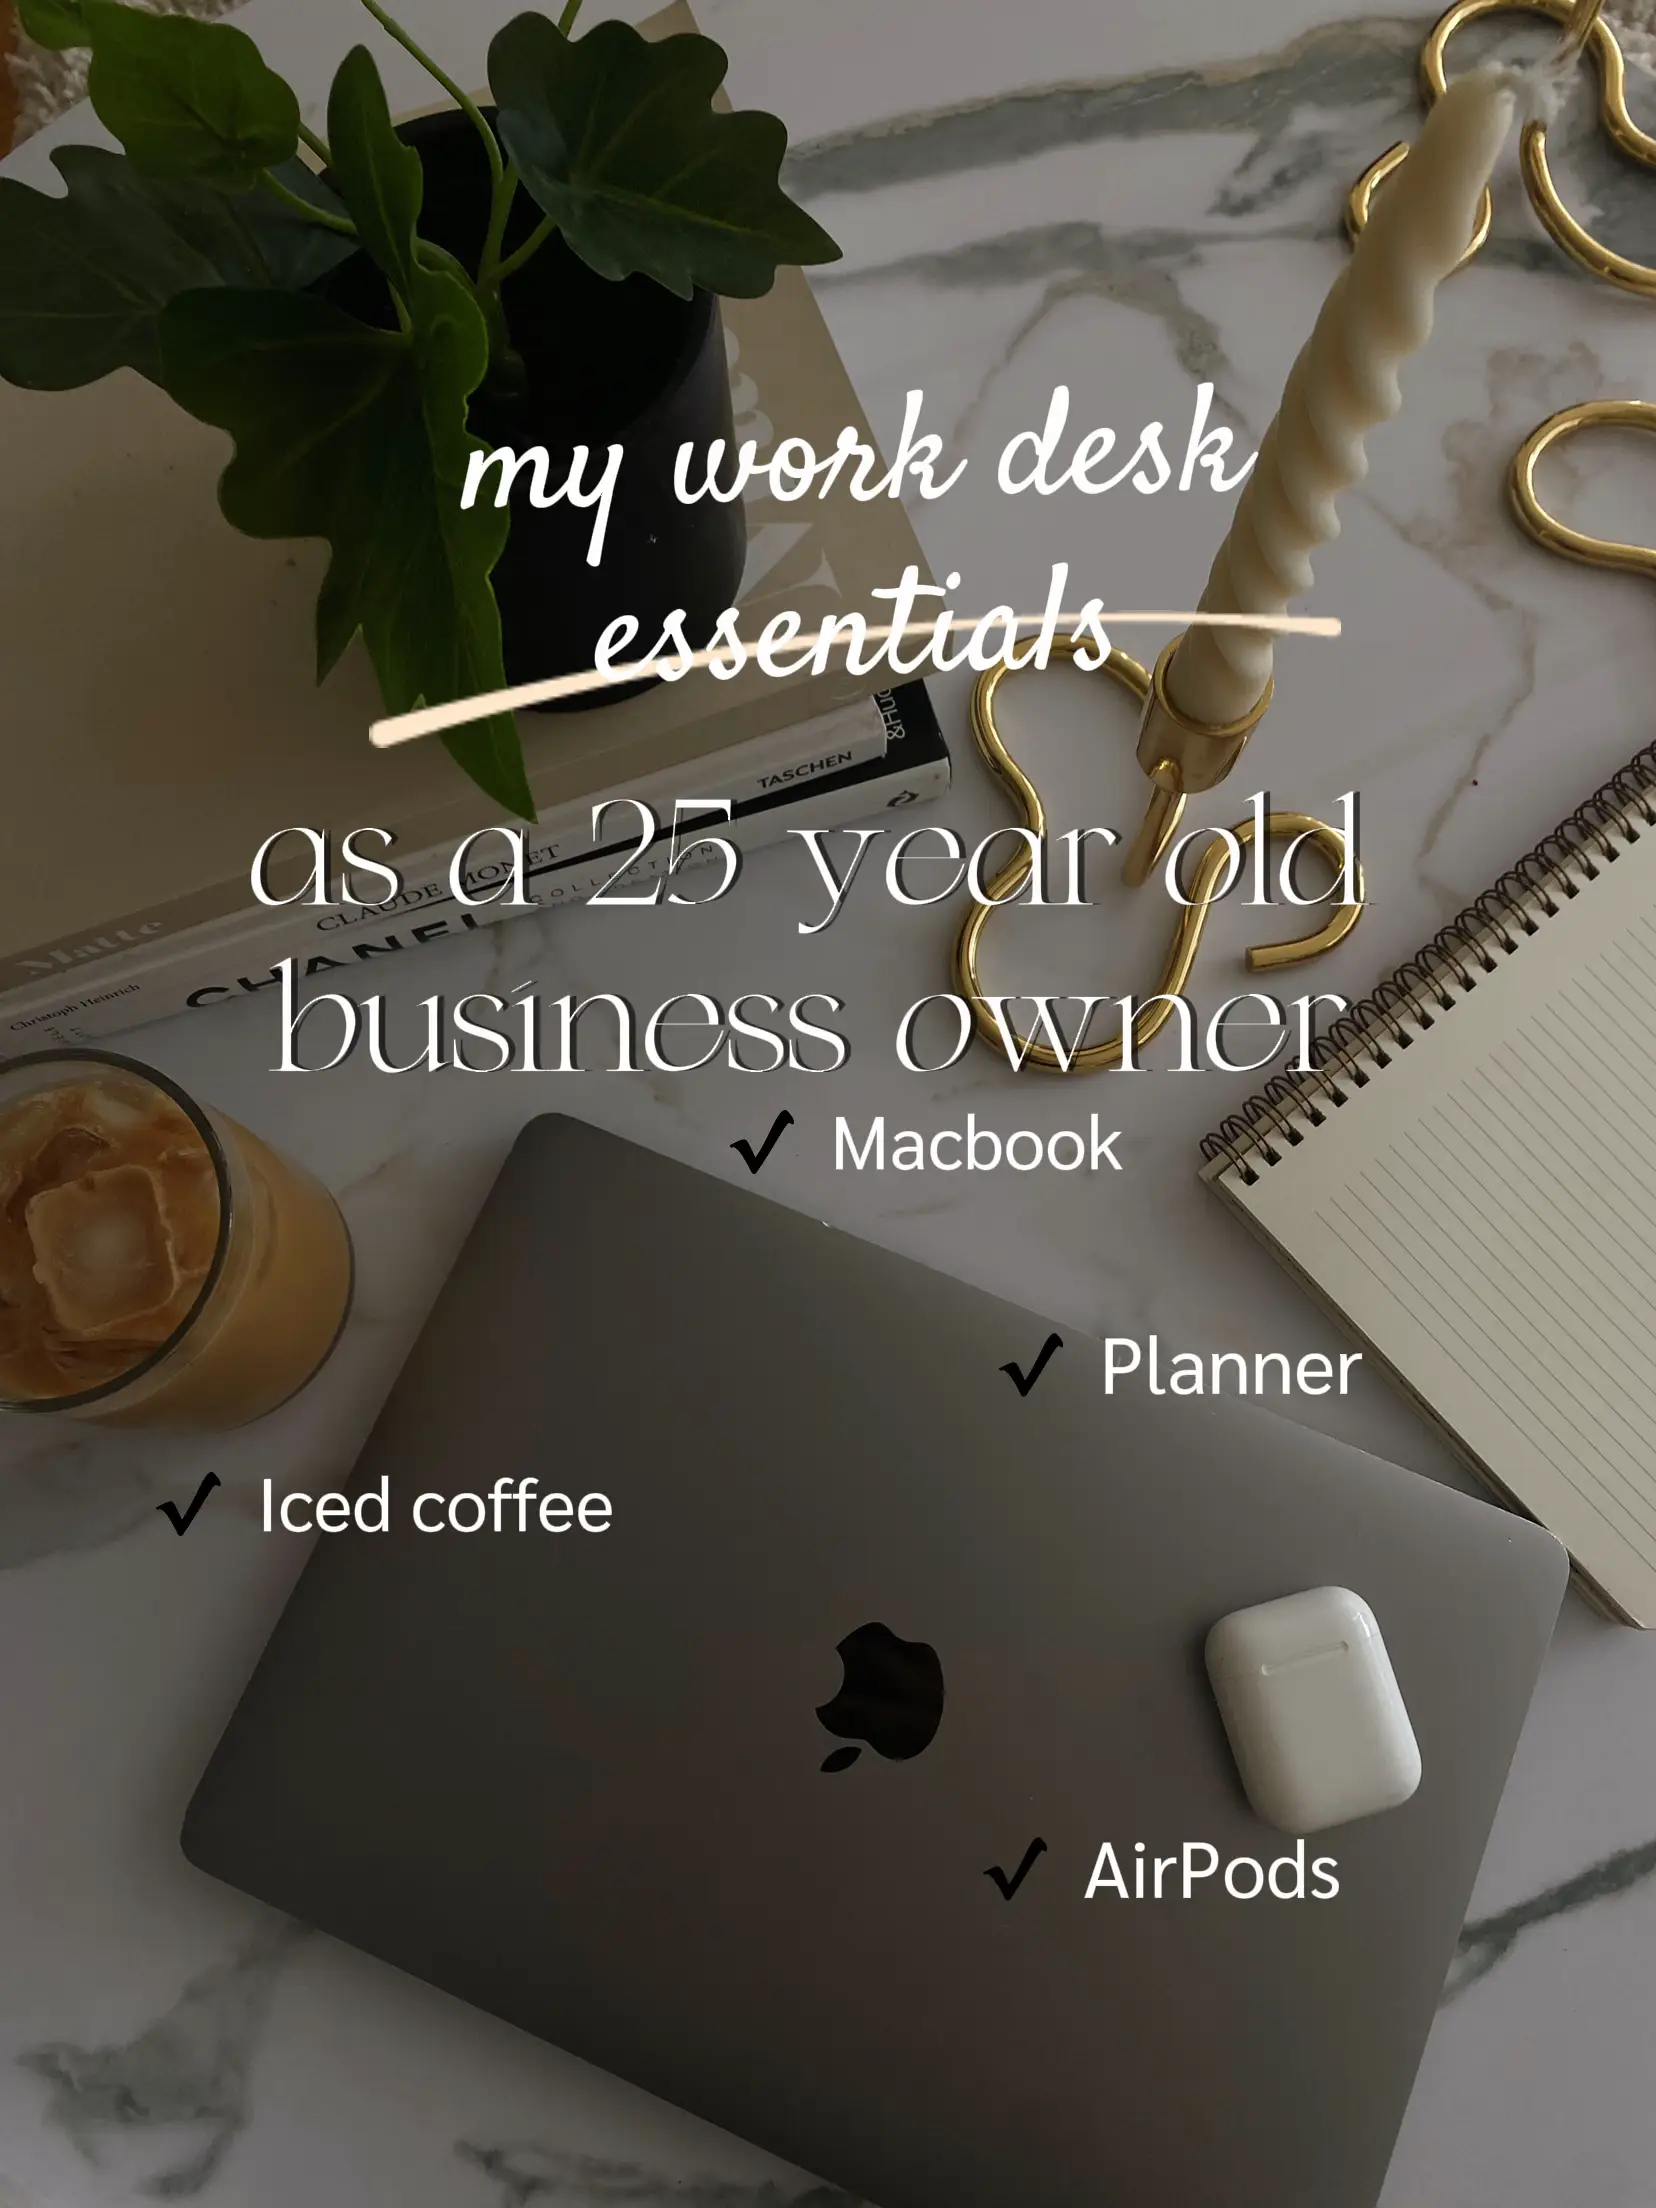 My Work Desk Essentials as a 25 year old Biz Owner, Gallery posted by  michaelajonsson